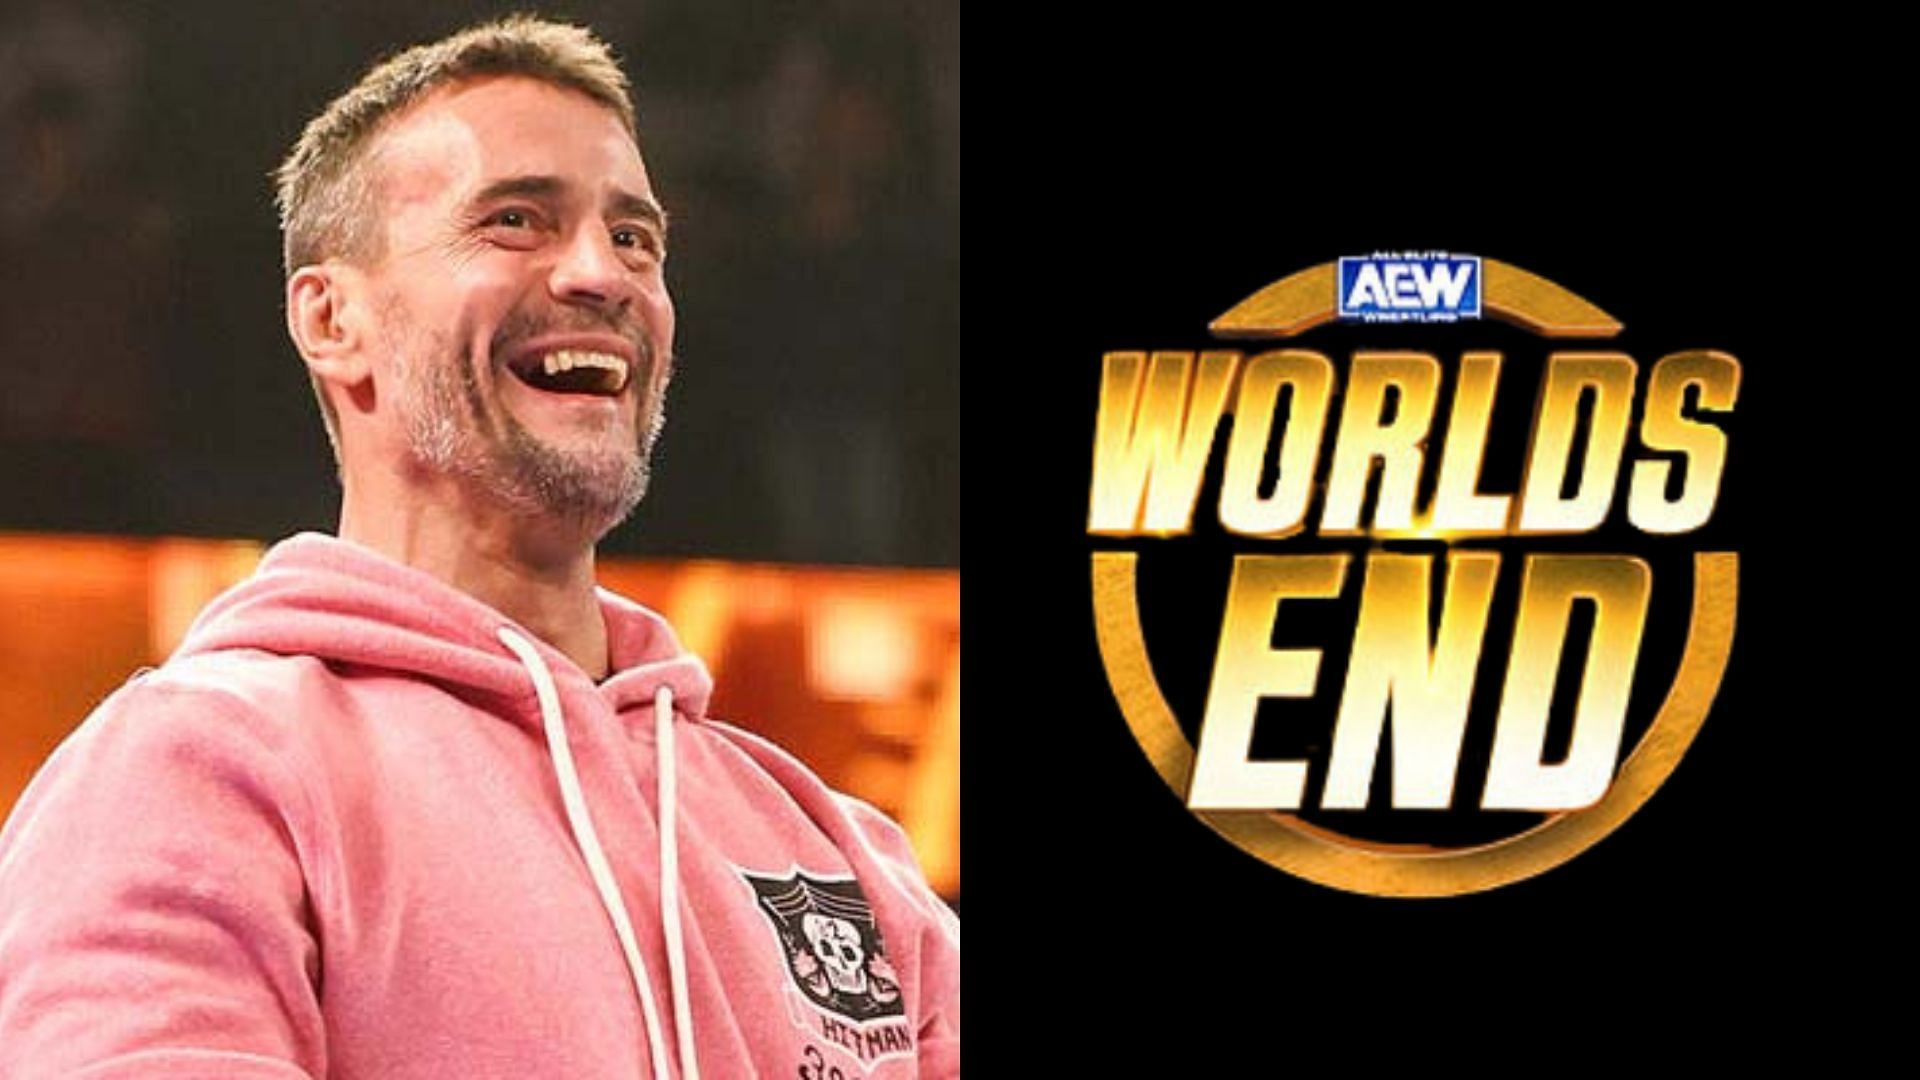 CM Punk will be making his WWE in-ring return on December 26th in Madison Square Garden